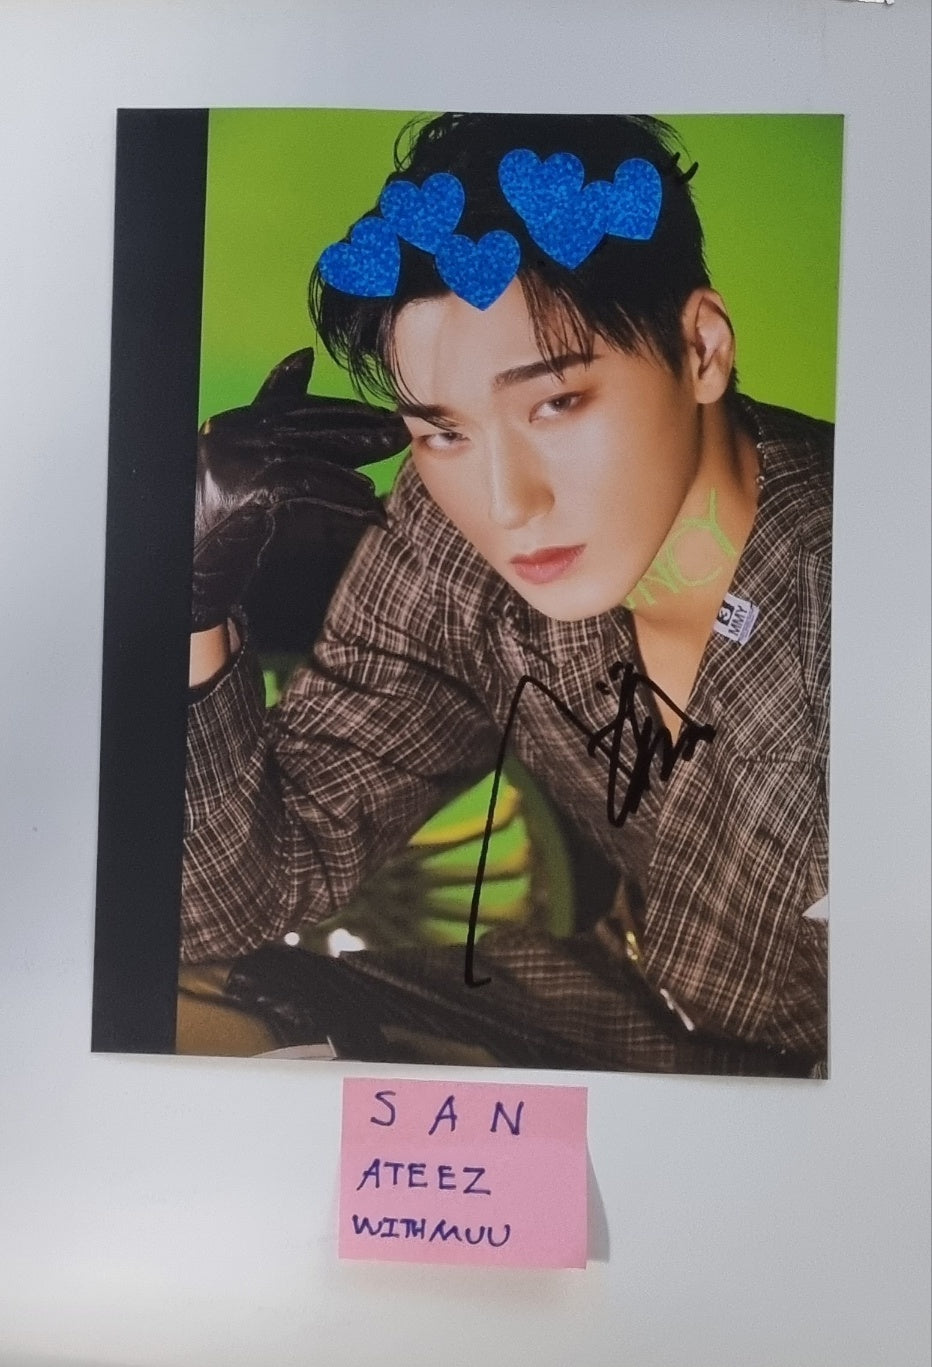 SAN (Of ATEEZ) "THE WORLD EP.2 " - A Cut Page From Fansign Event Album